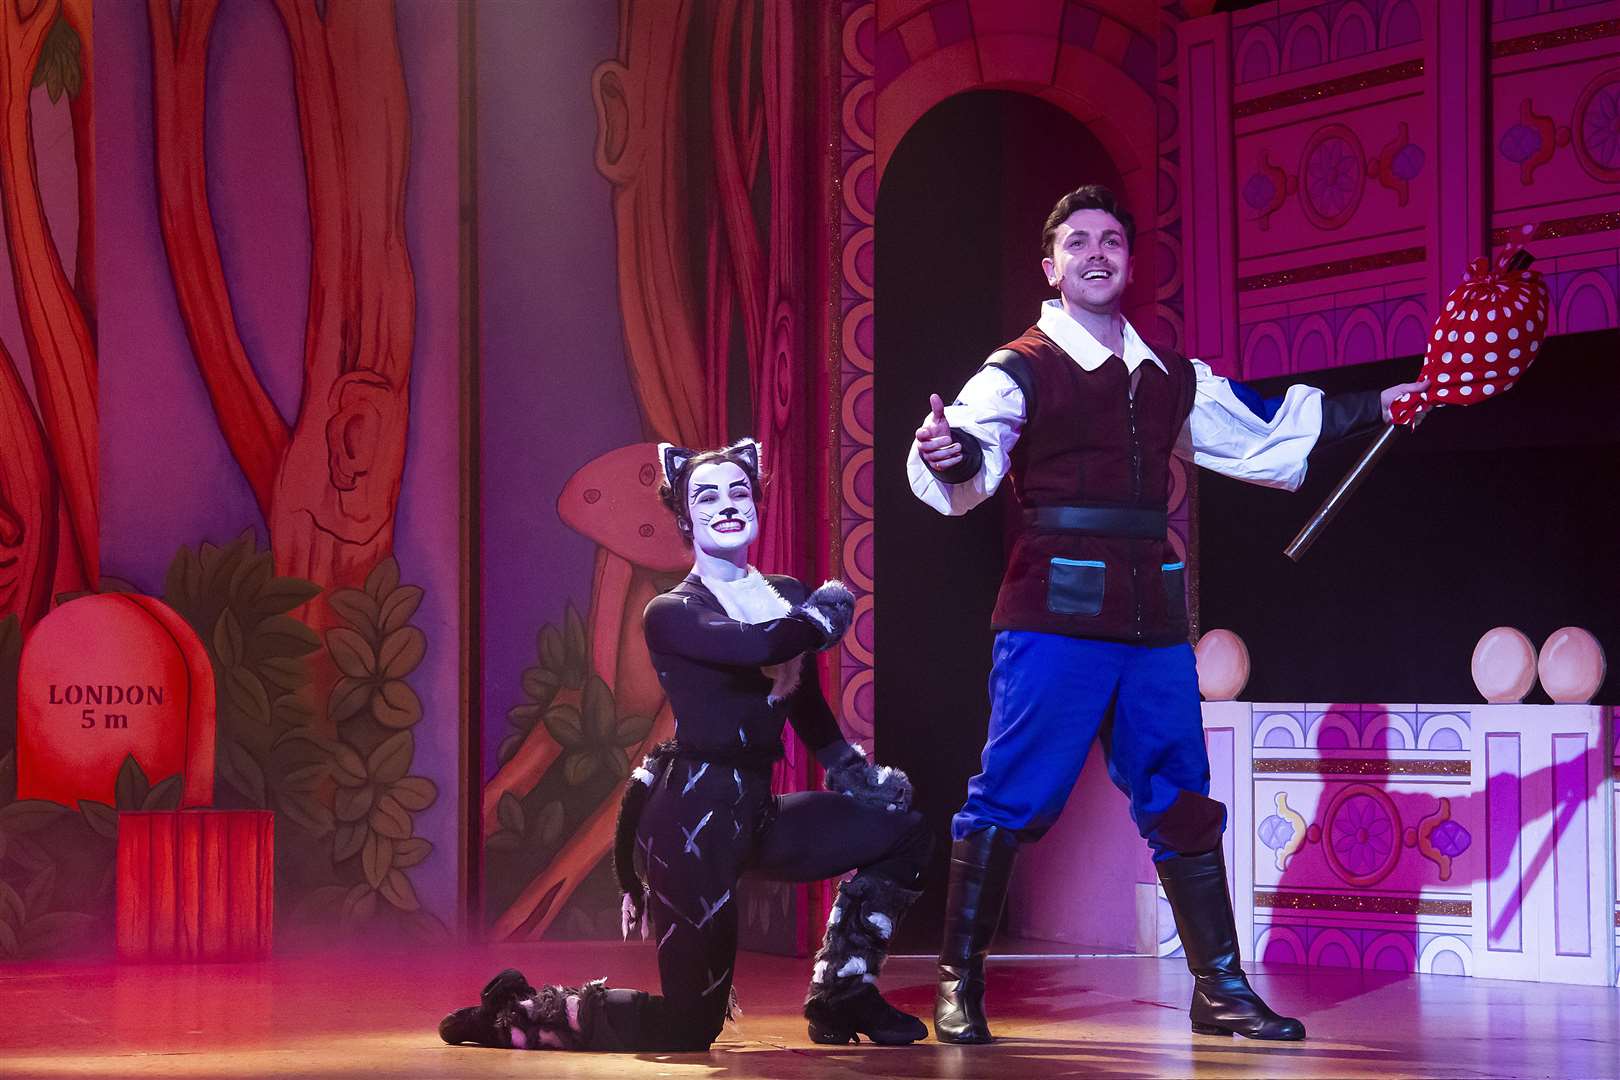 Ray Quinn as Dick Whittington dances on stage with his cat (5918237)